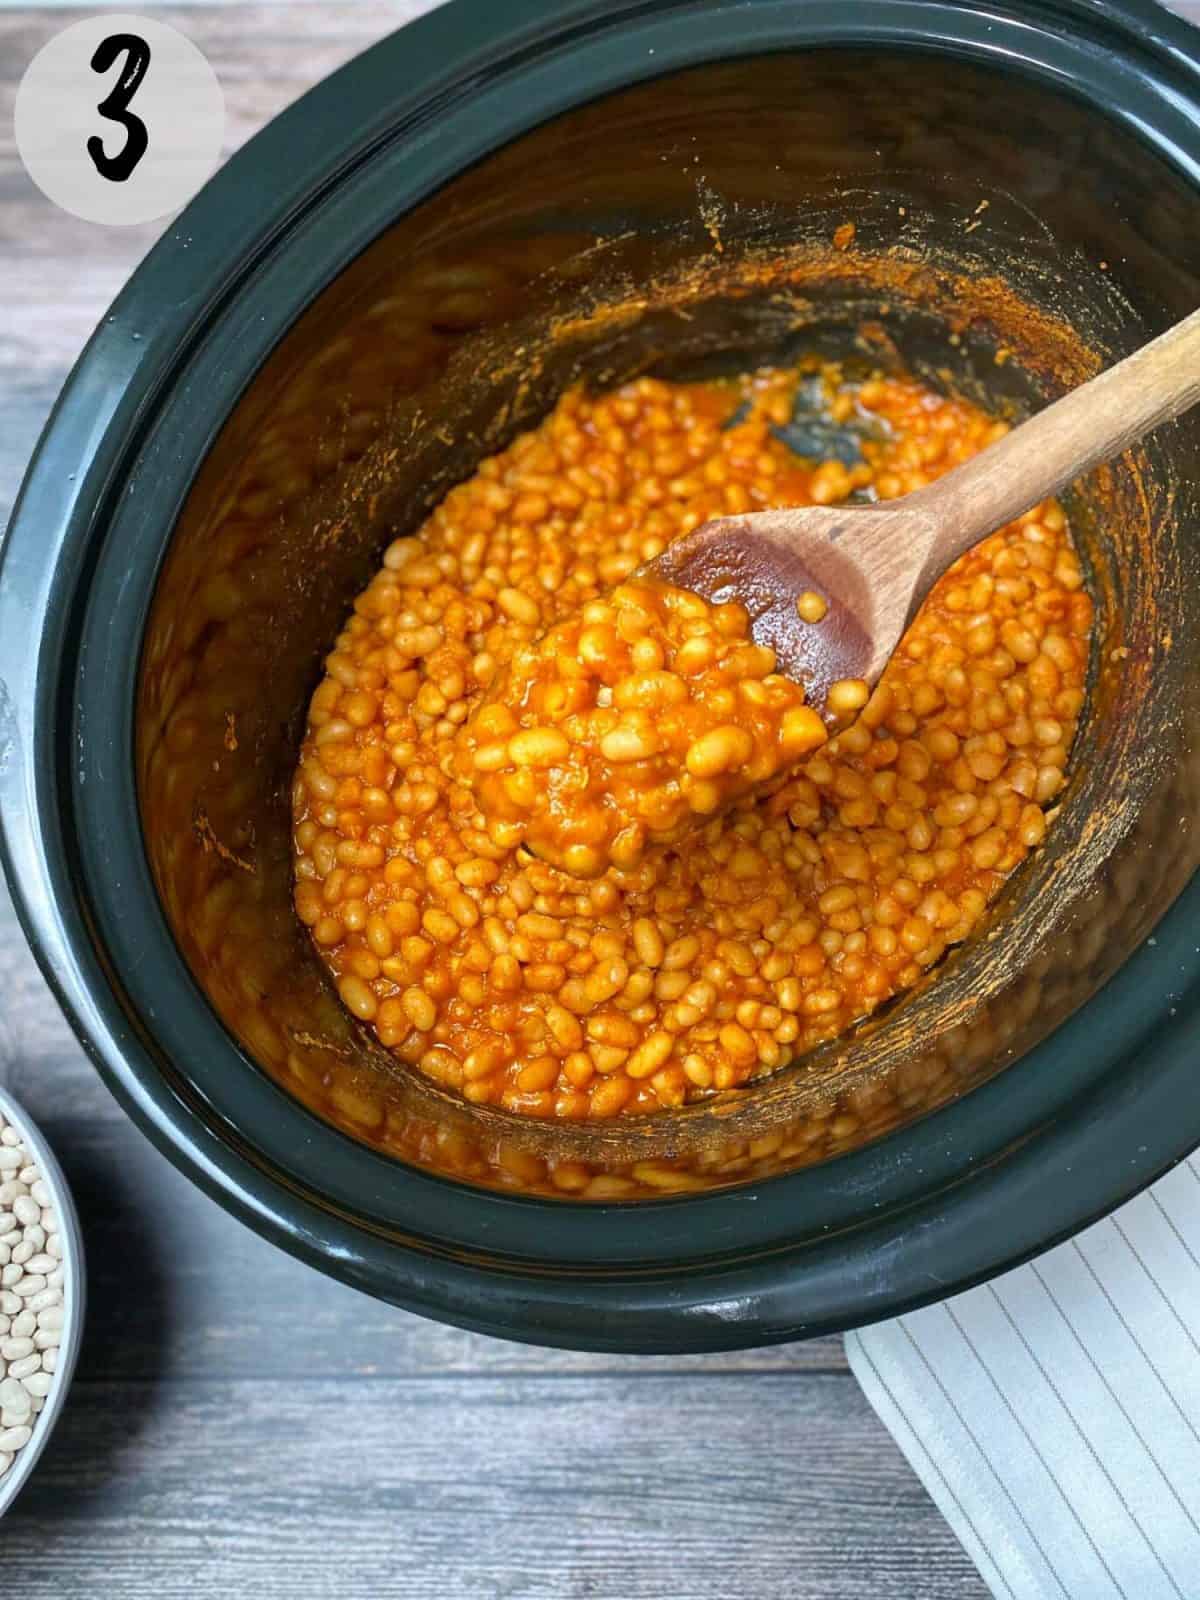 baked beans cooked in slow cooker with wooden spoon lifting a bite